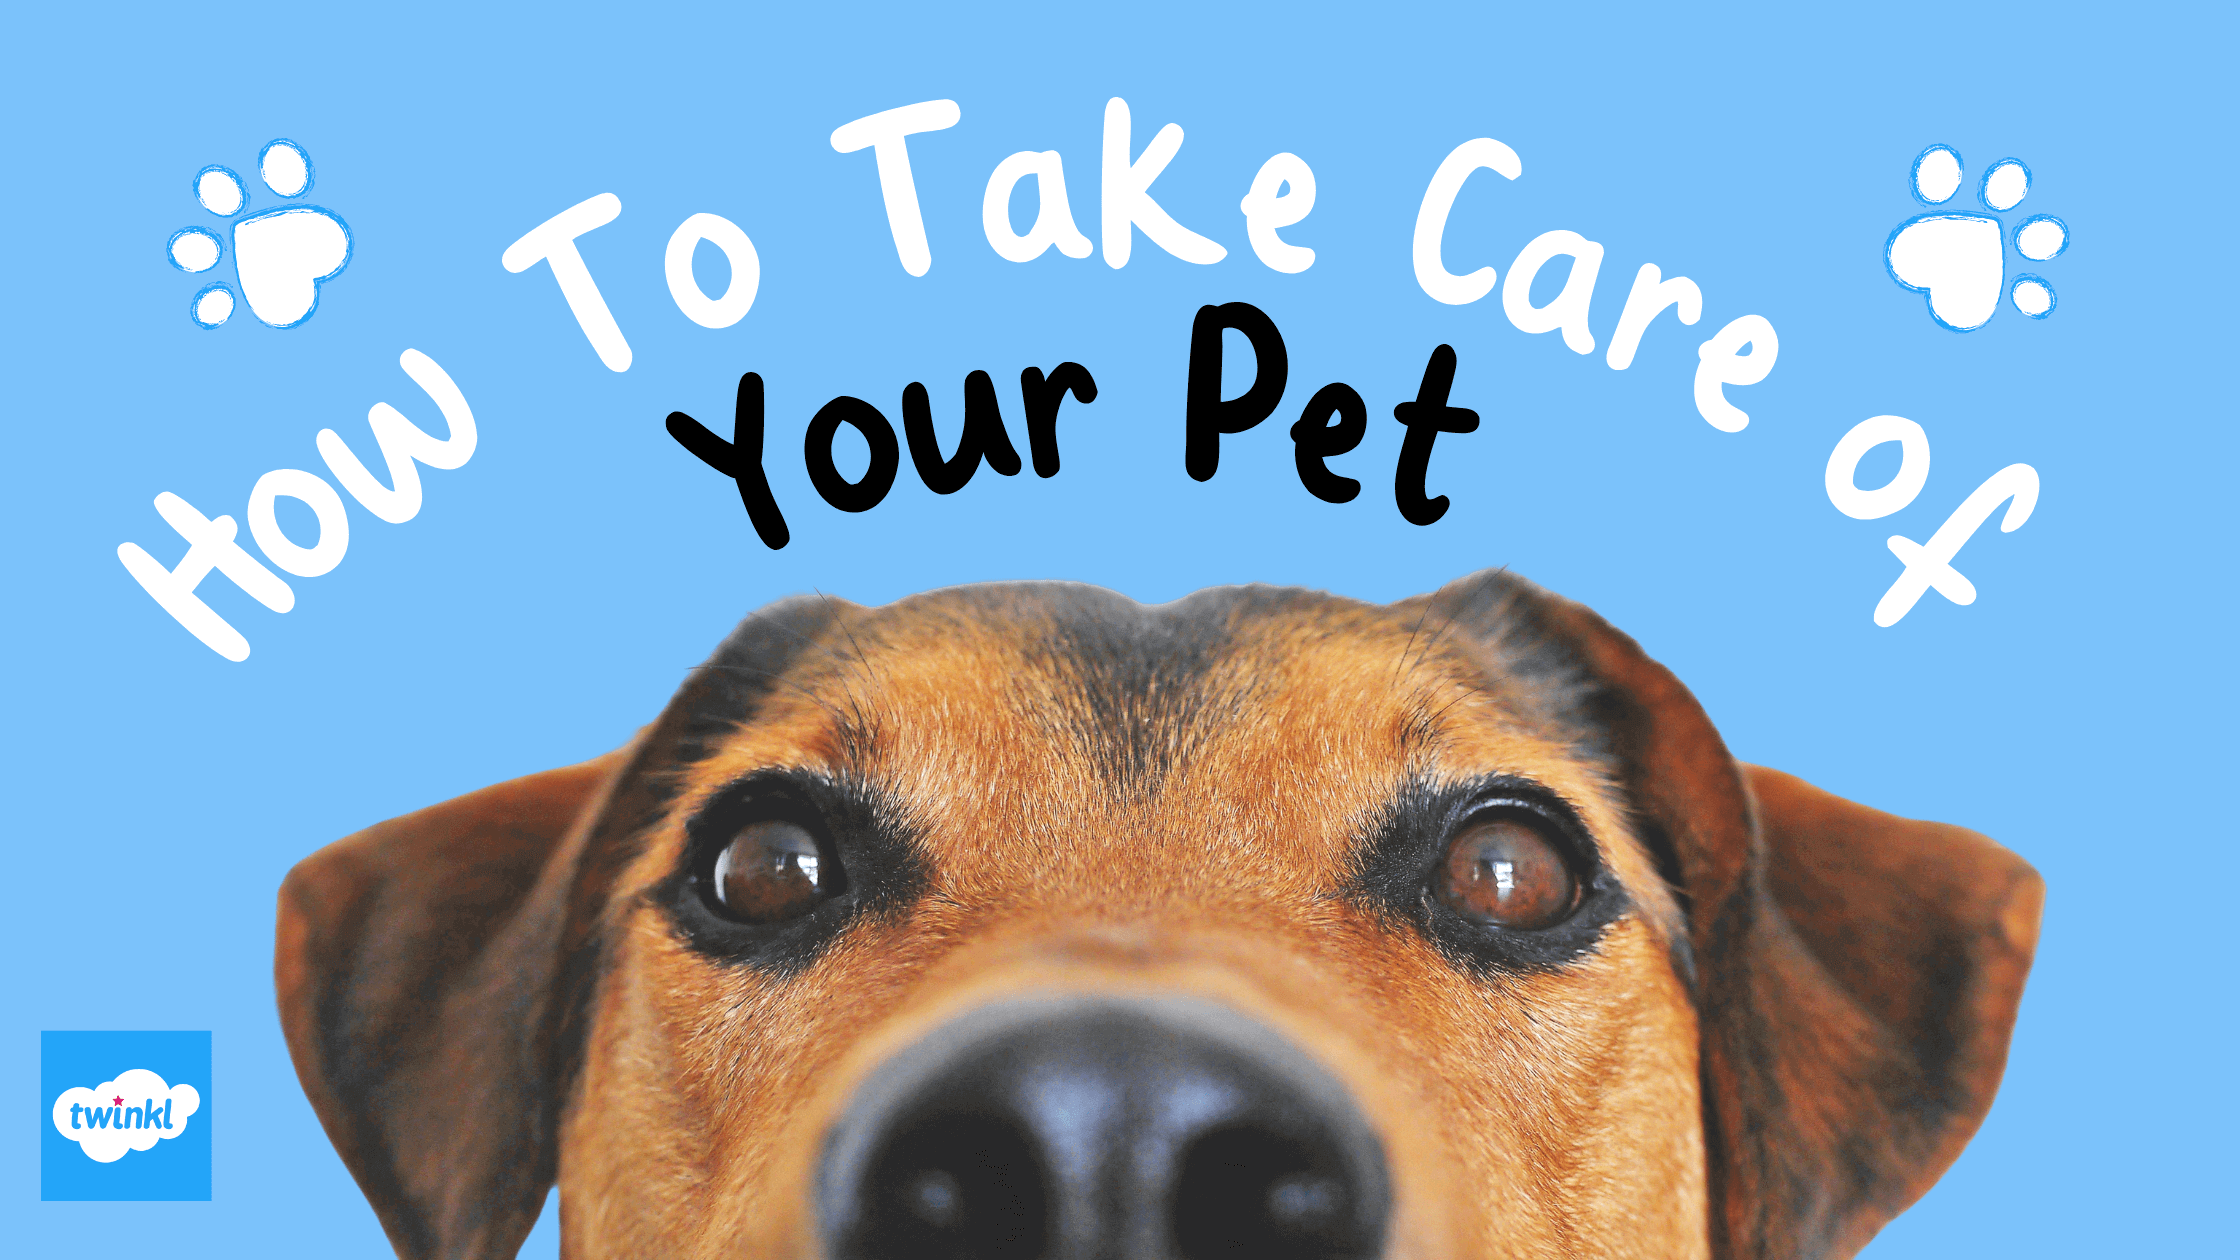 How to Take Care of a Pet - Essential Tips & Info